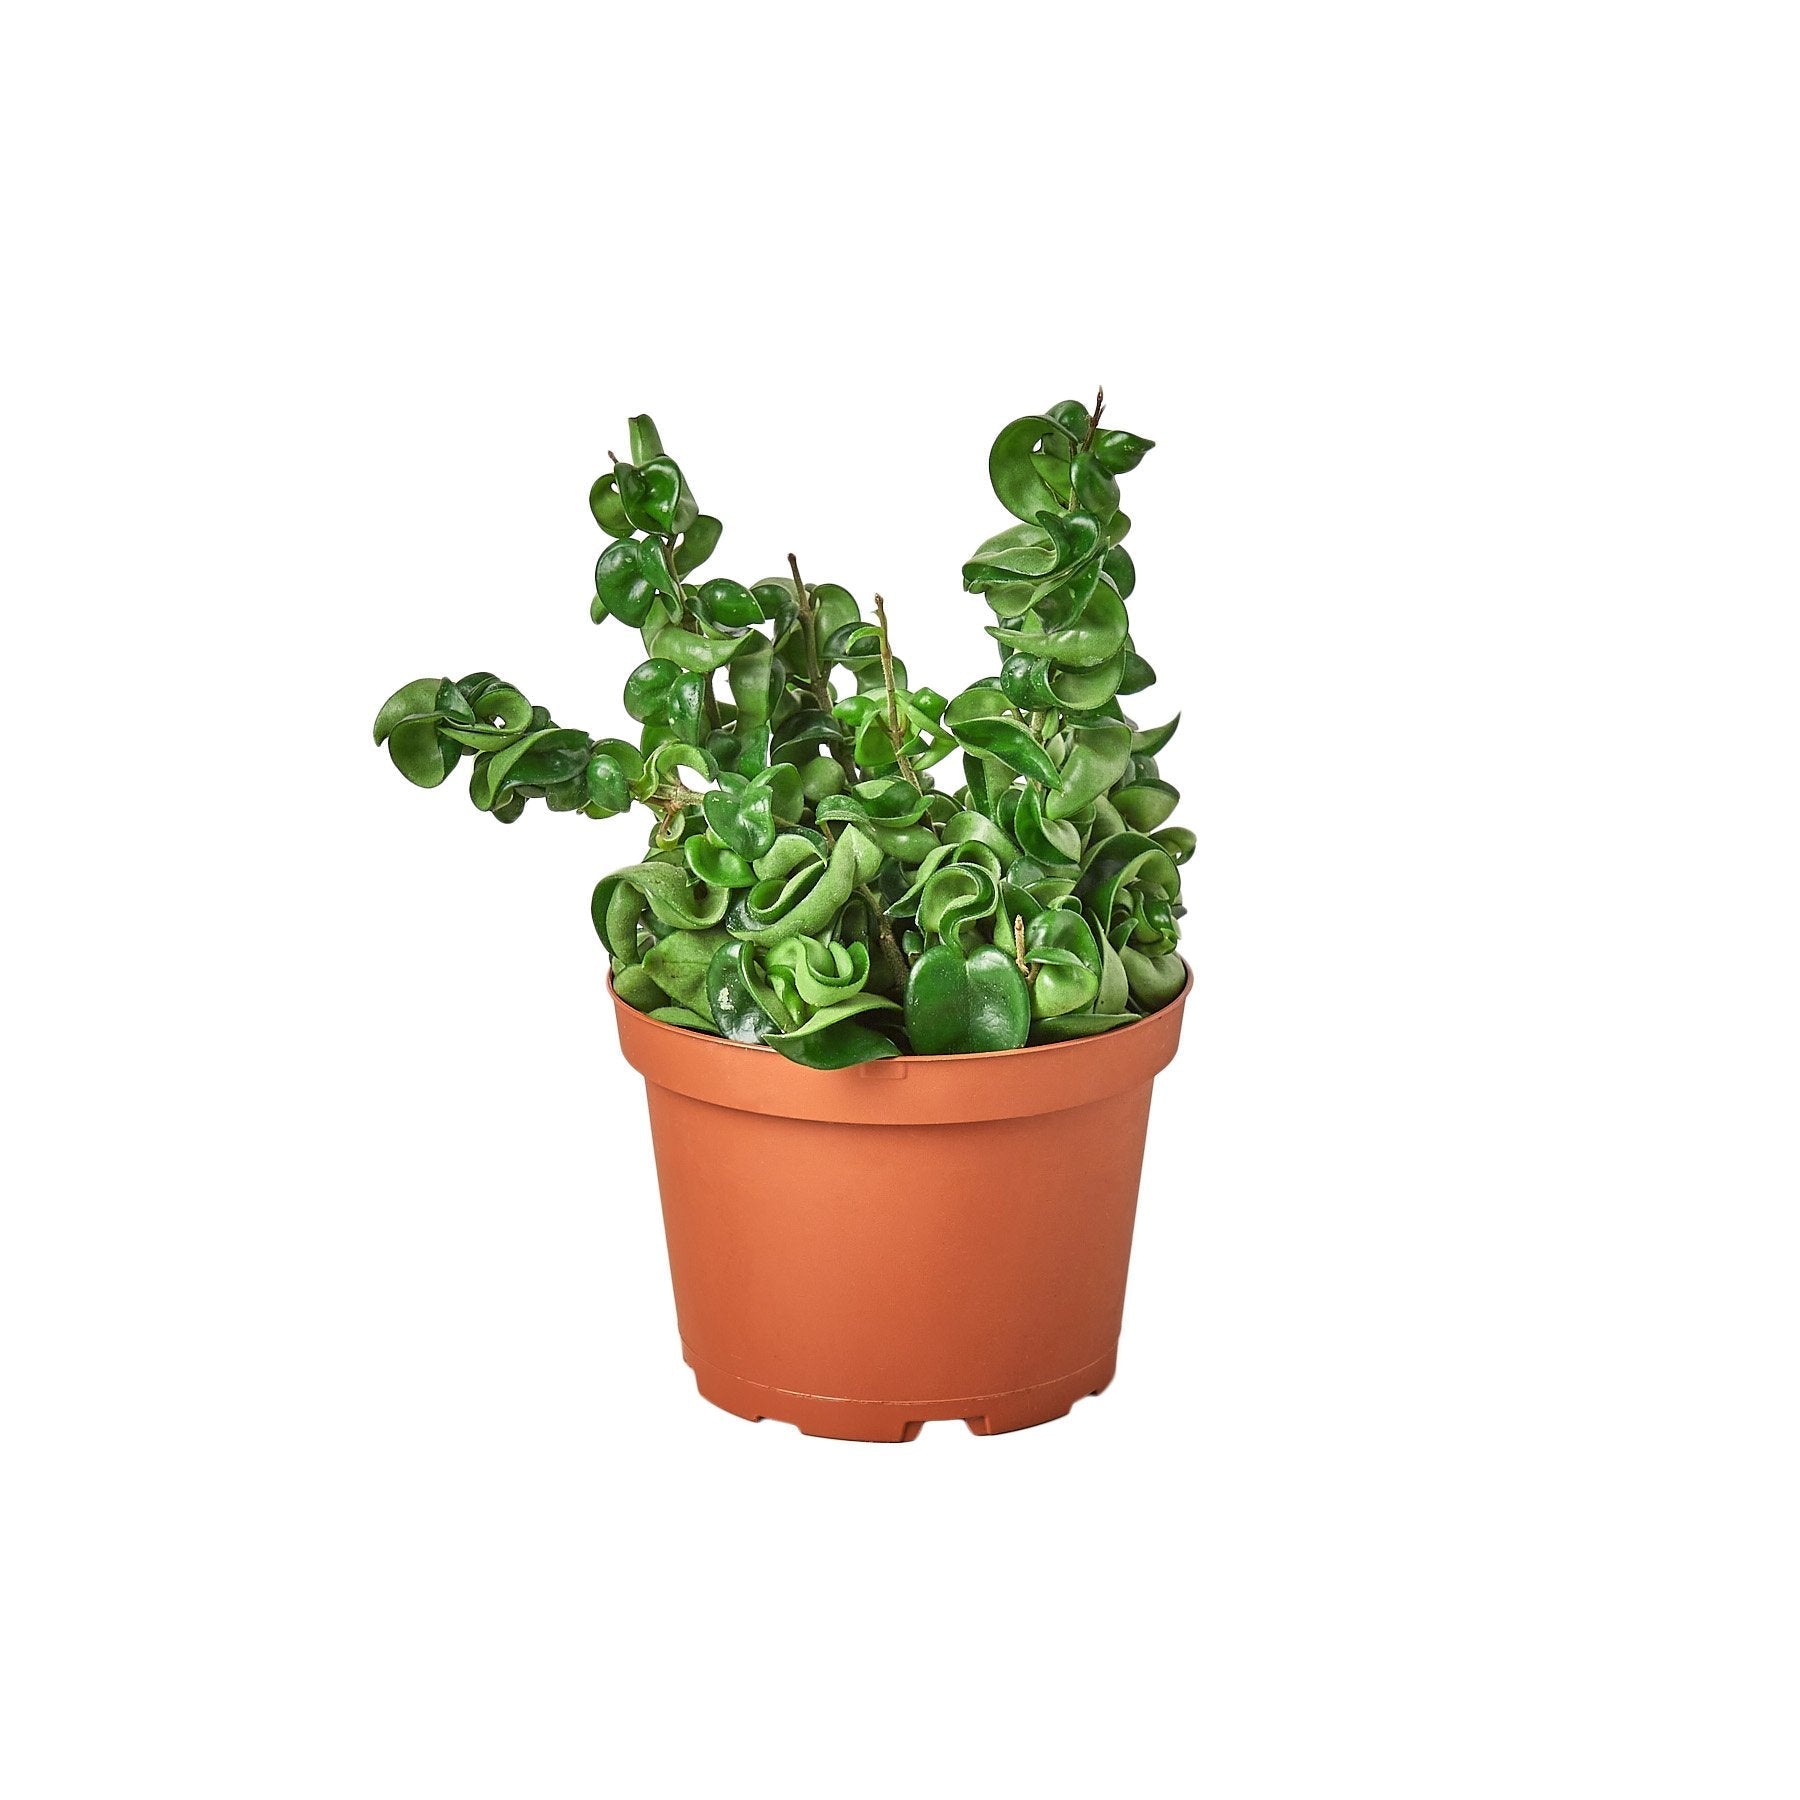 A small plant in a pot on a white background. Top garden centers near me.